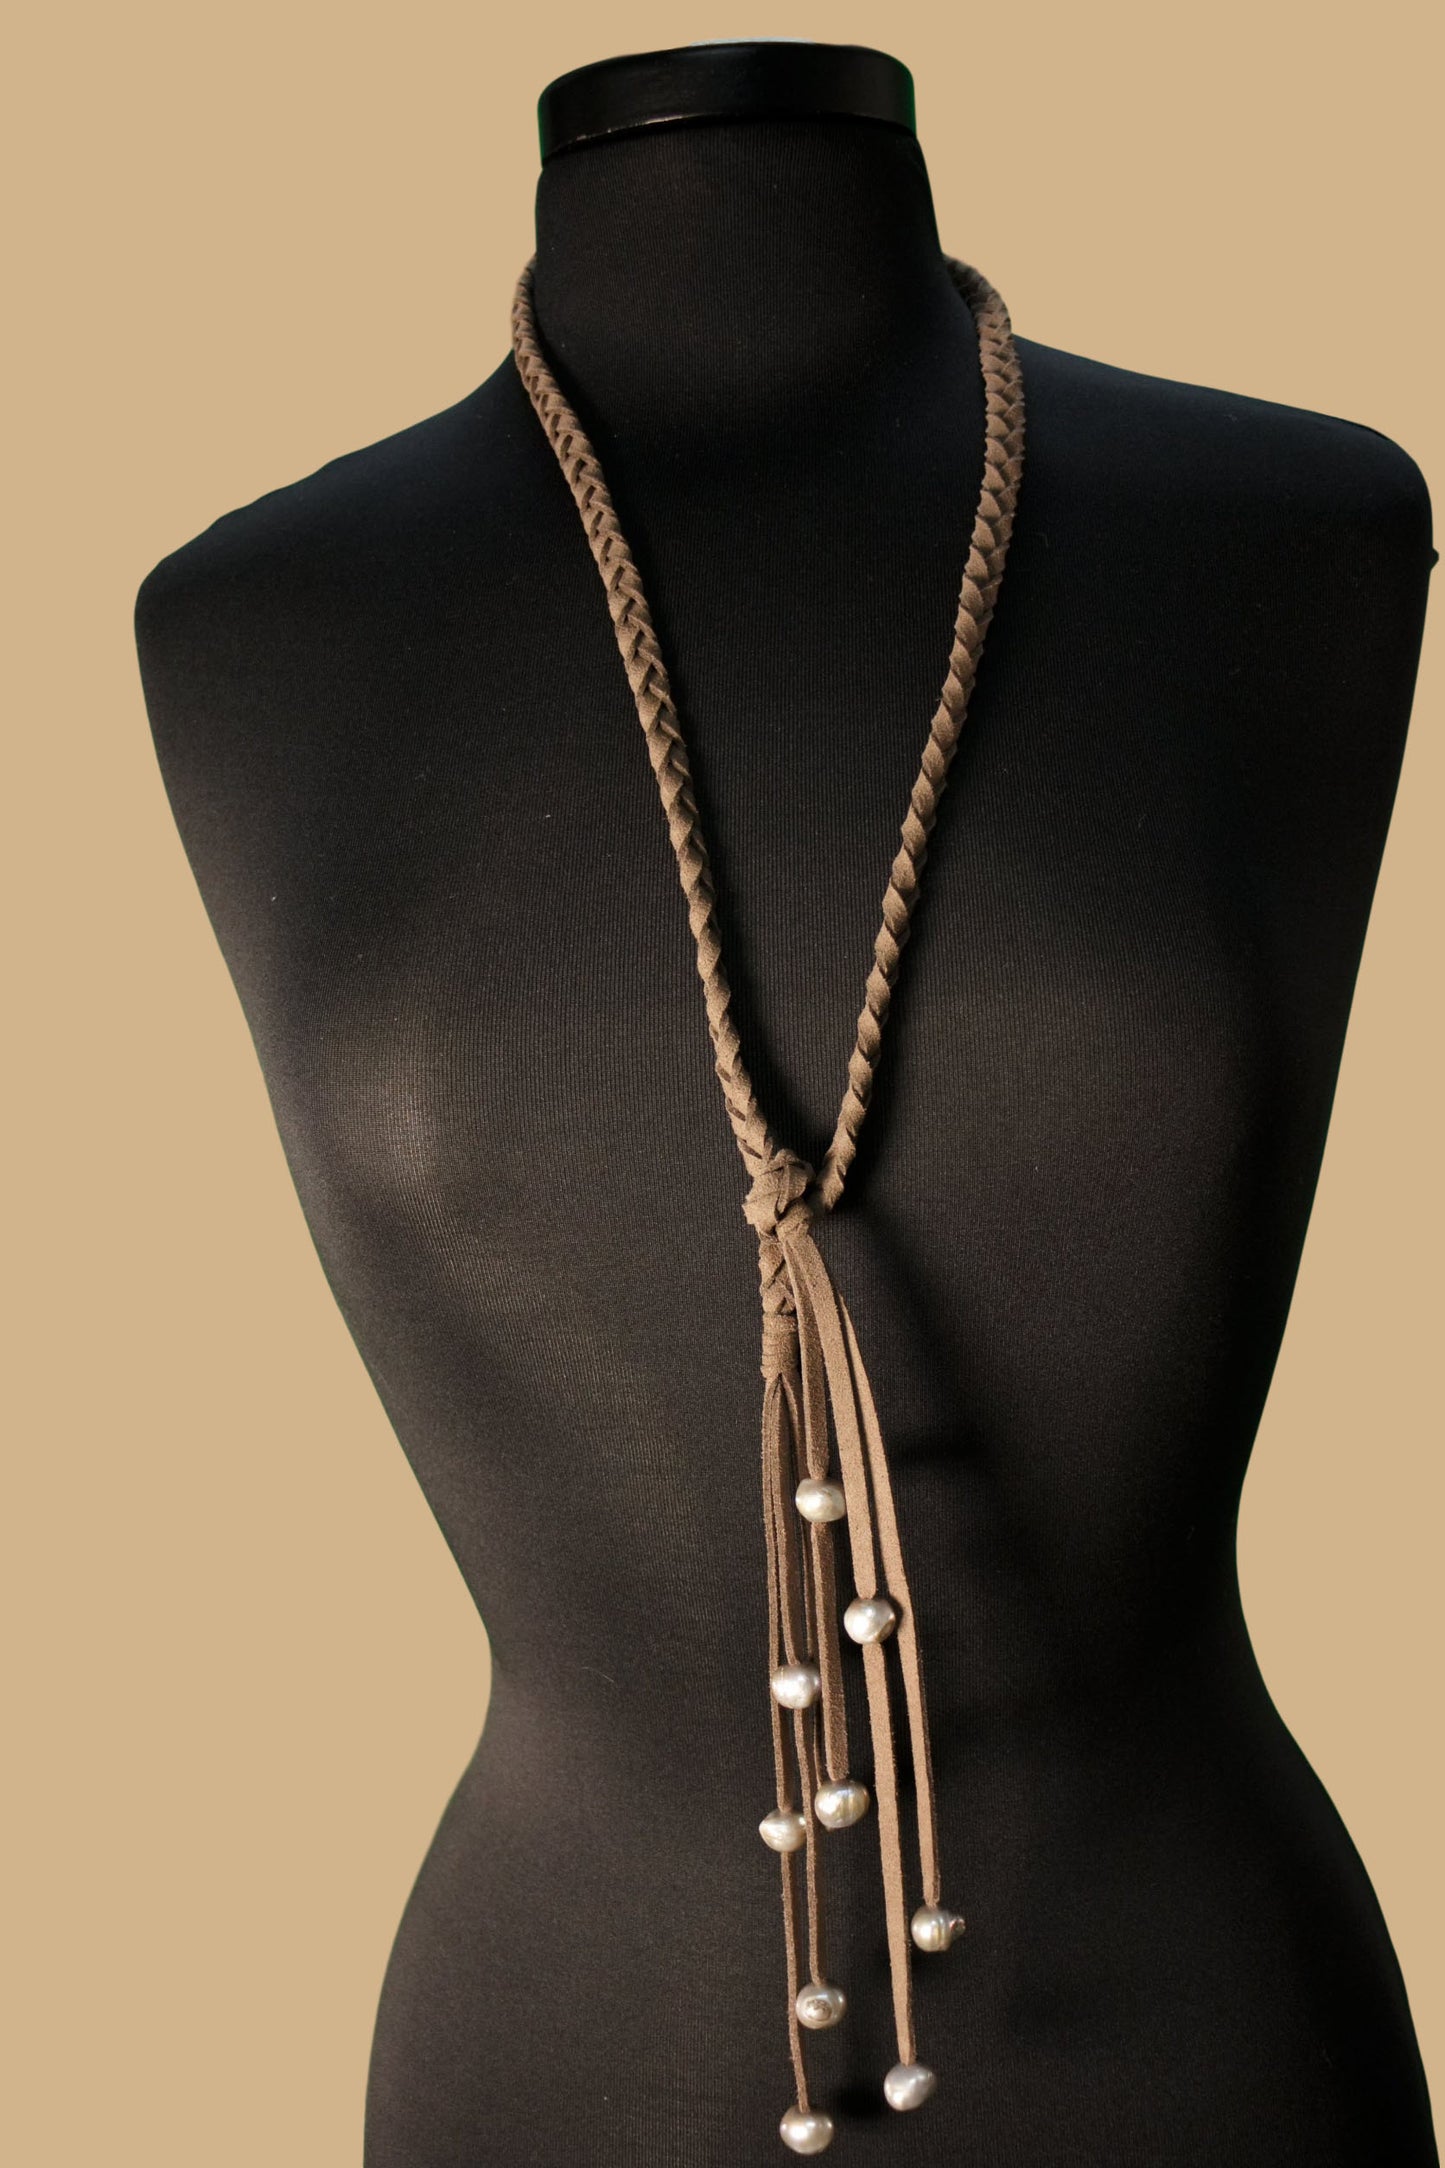 NKL501 Braided Leather Lariet Necklace